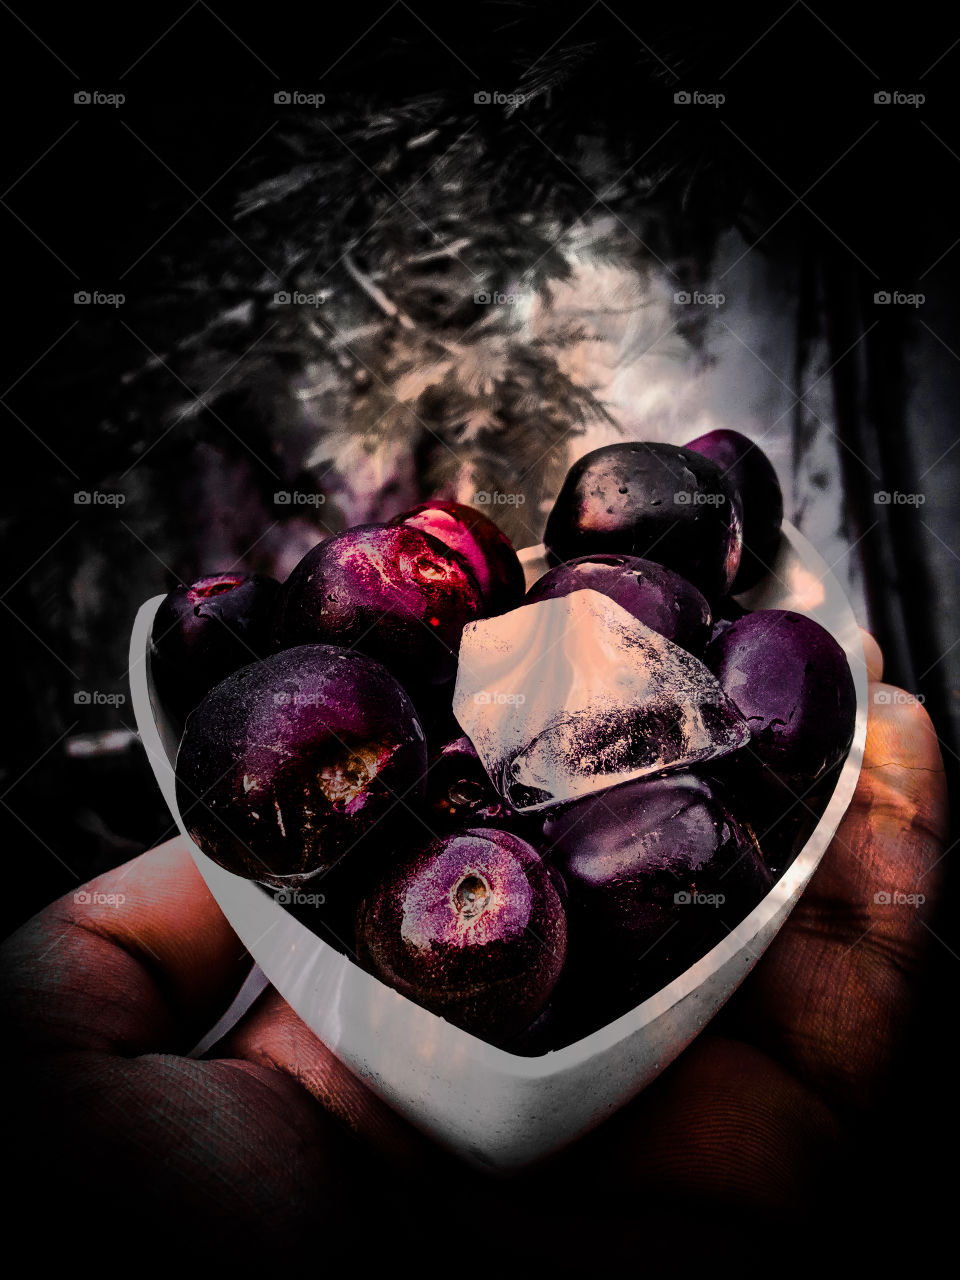 #jamun#ice#bowl#no person#festival #colorful #hand #fingers # tress #nature #me